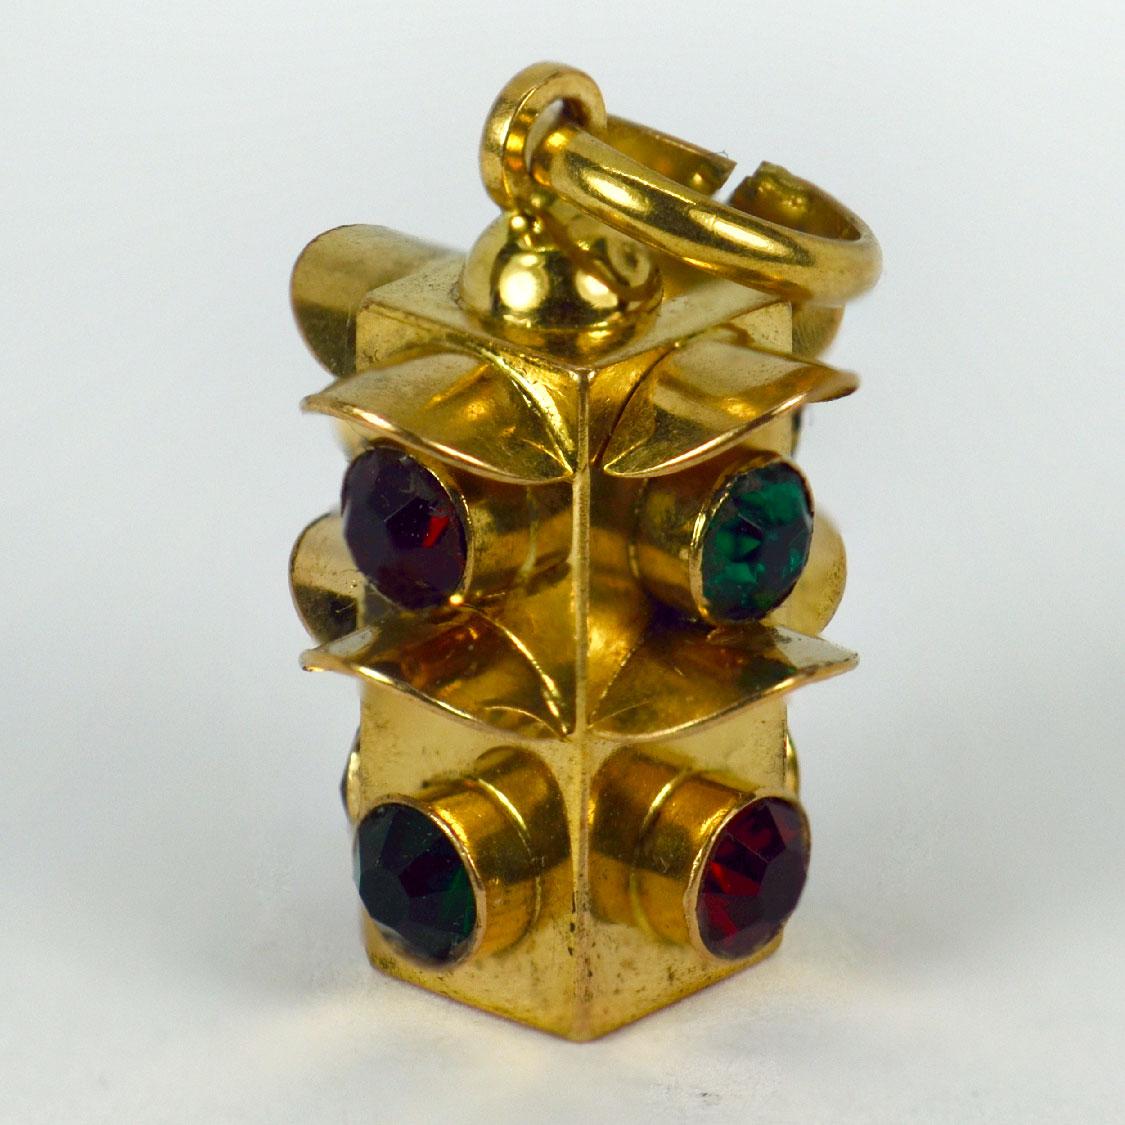 An Italian 18 karat (18K) yellow gold charm pendant designed as a set of traffic lights with red and green paste. Stamped 750 for 18 karat gold, 1AR for Italian manufacture, and signed UNOAR.

Dimensions: 2.5 x 1.8 x 1.8 cm (not including jump